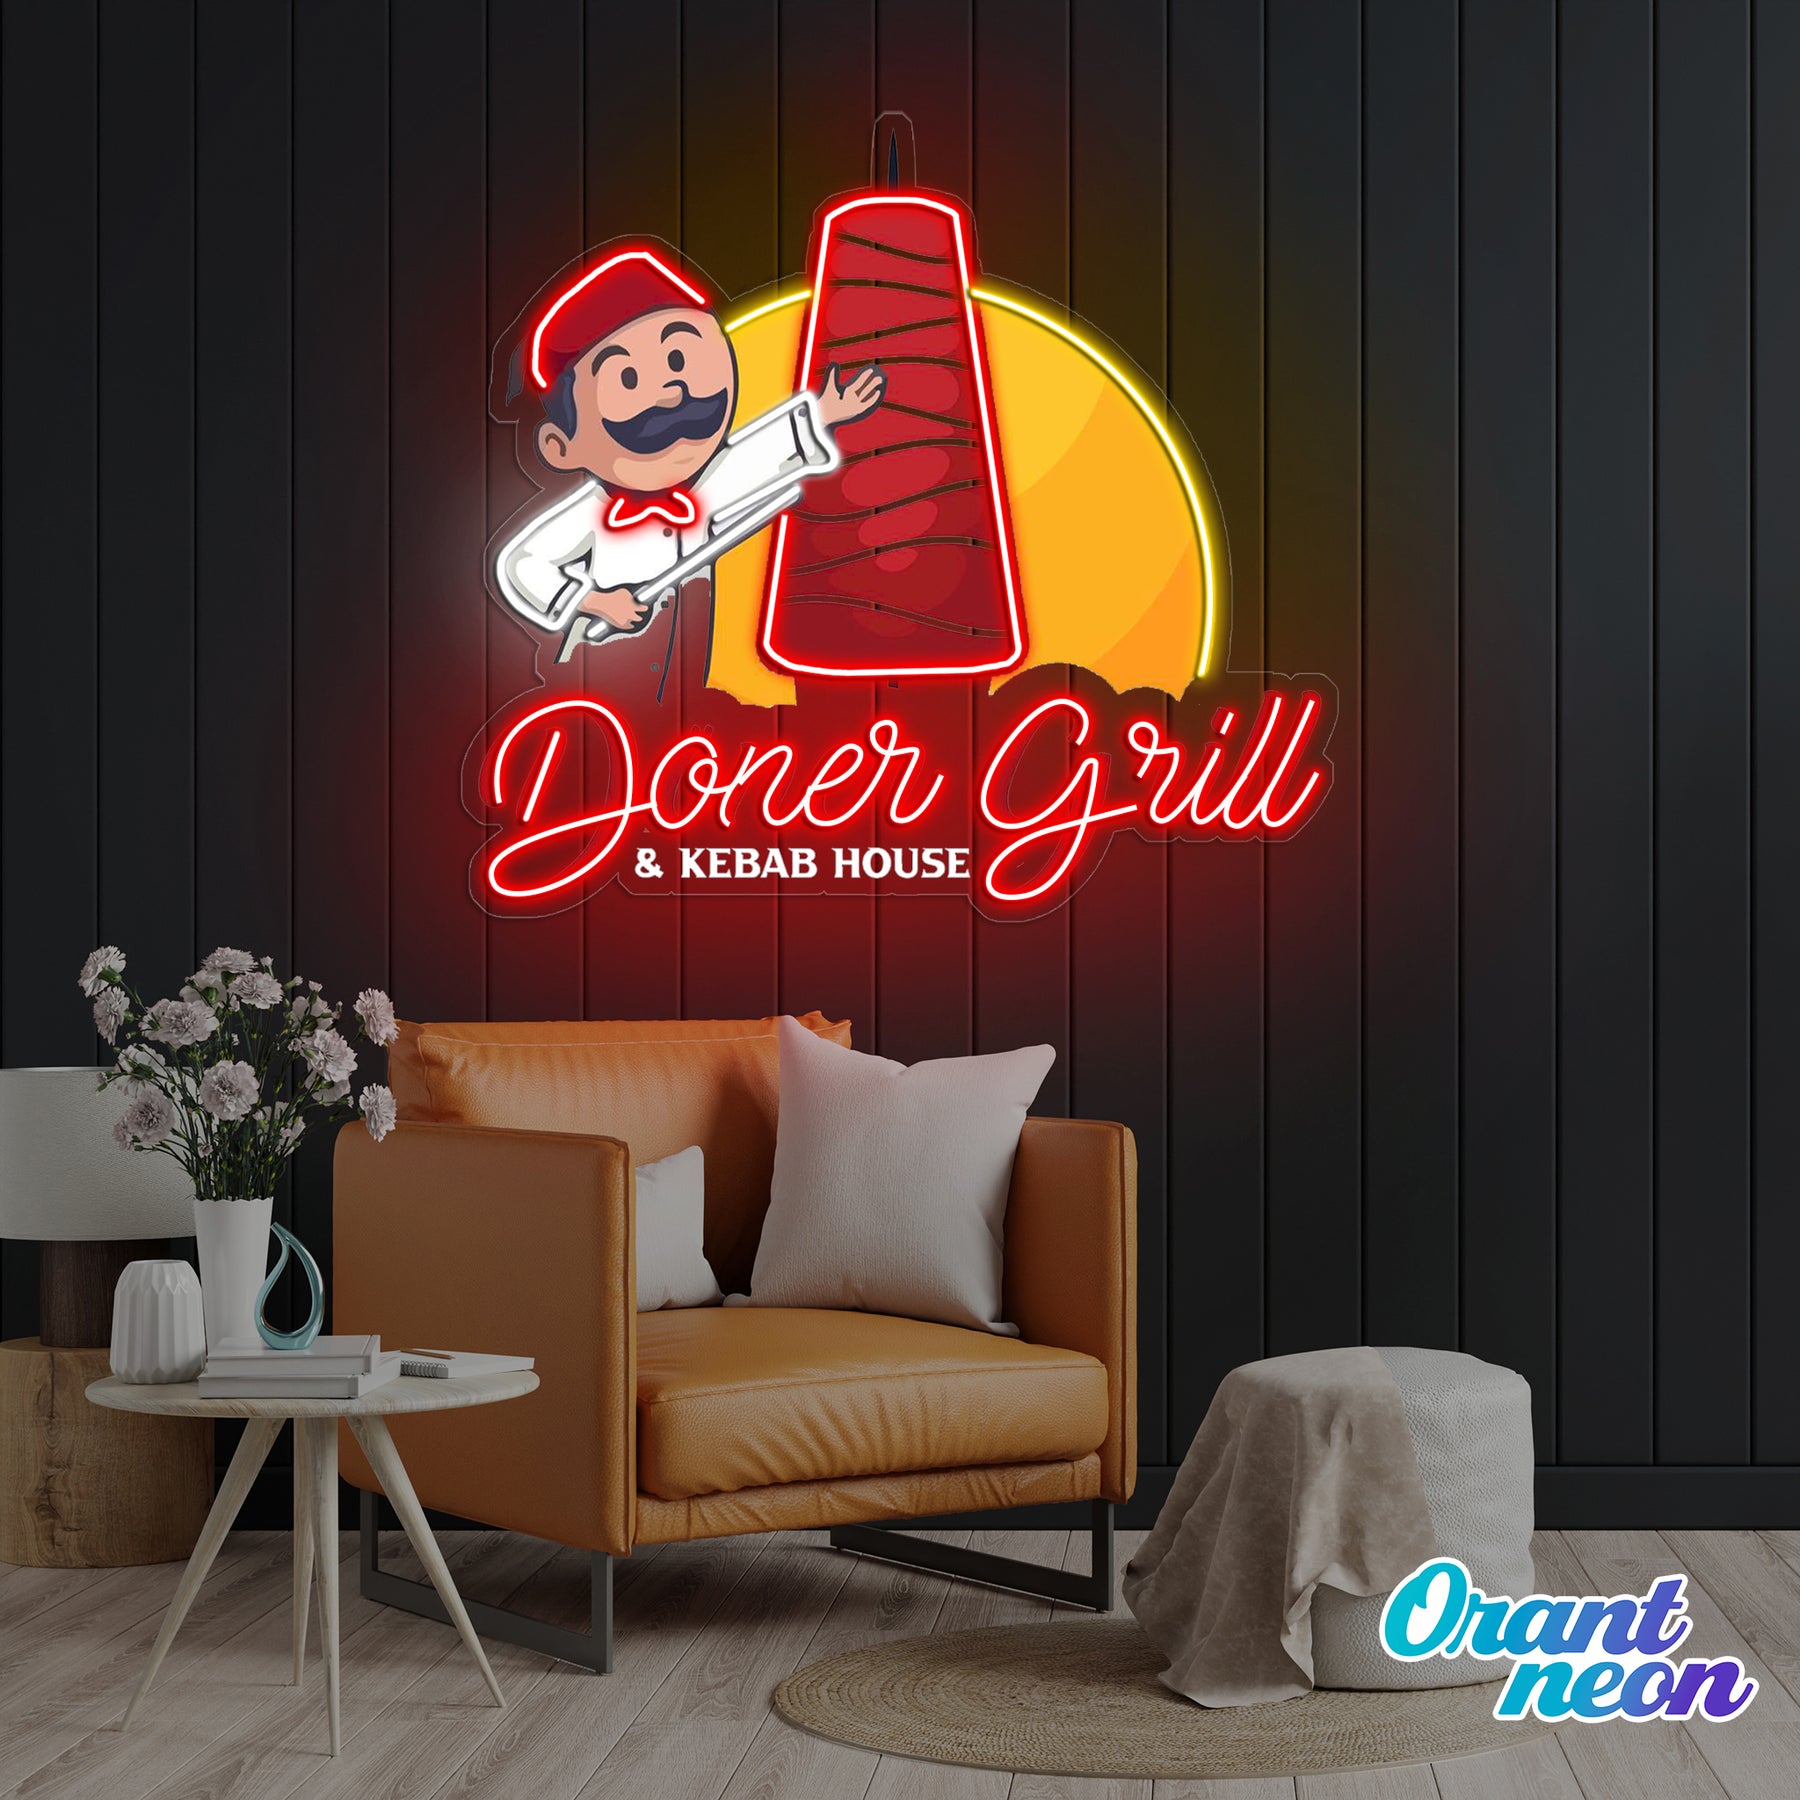 Doner Grill For Fawad Omarzad